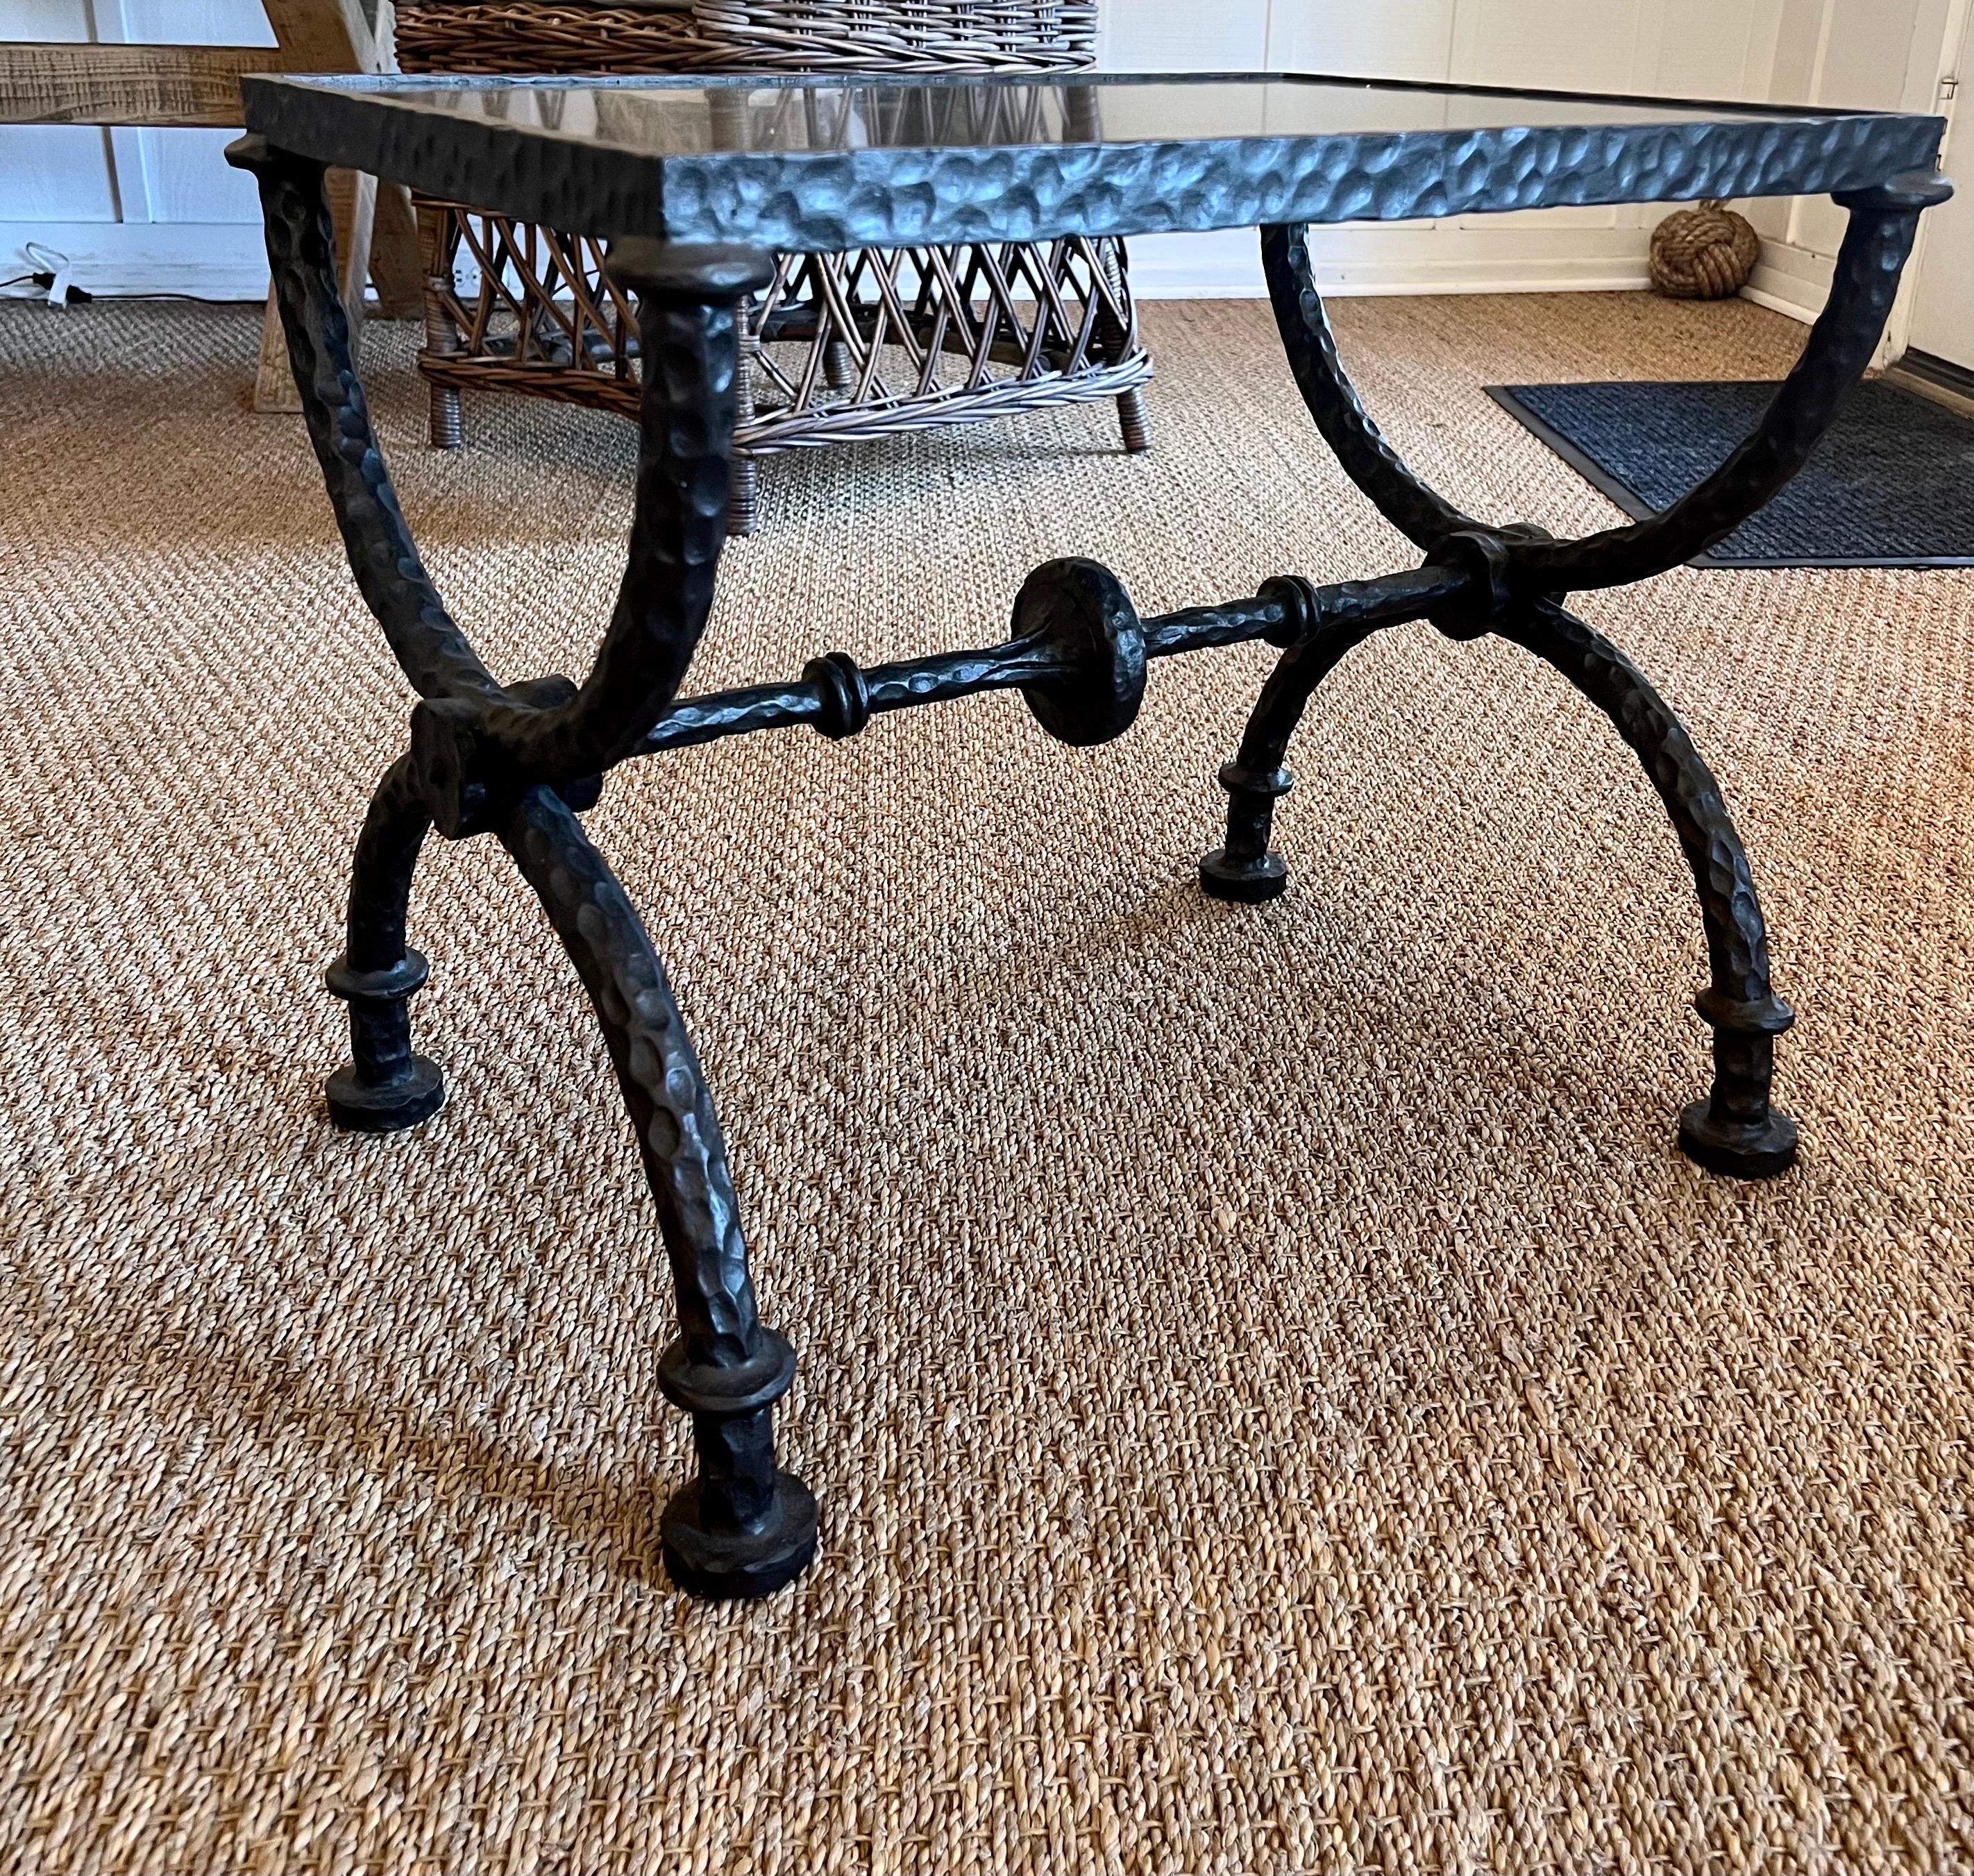 2 Elegant French Mid-Century Modern Style Hand Wrought and Hand Hammered Iron Benches or Side / End Tables in the style of Alberto and Diego Giacometti. The benches / tables are composed in an iconic Curile X-form characteristic of the Giacometti's